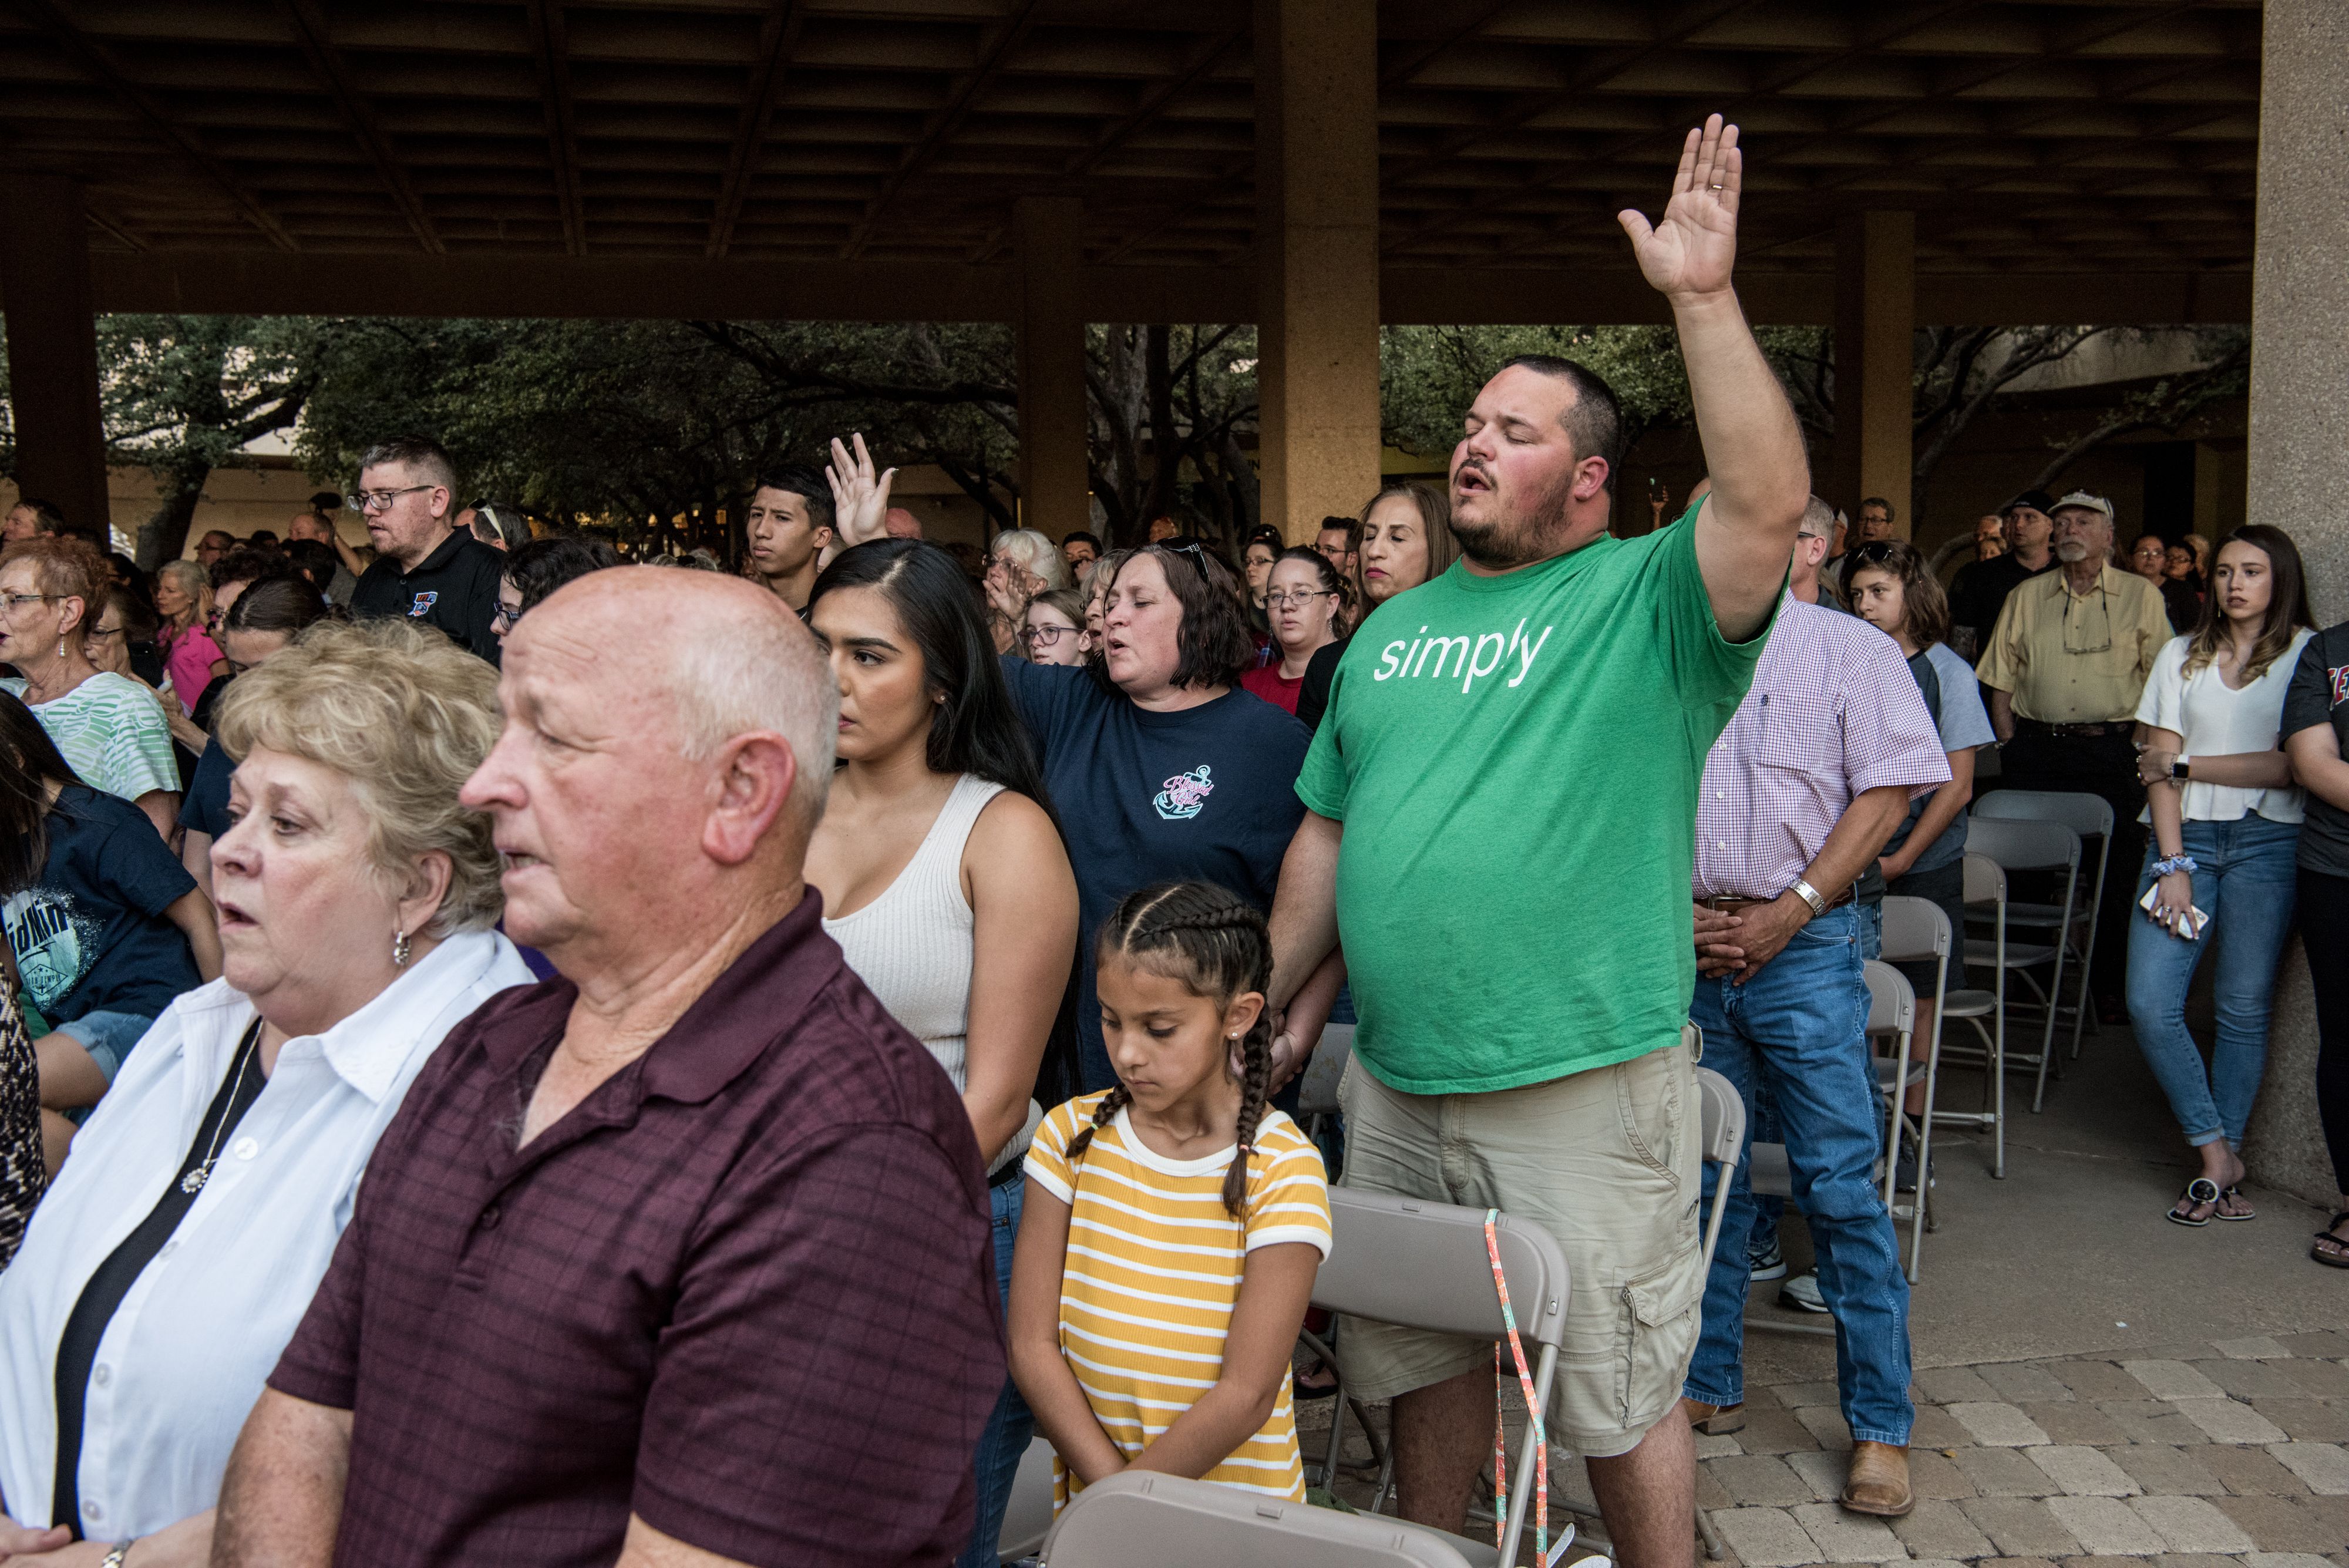 Charles Litchford prays during a vigil at the University of Texas of the Permian Basin (UTPB) for the victims of a mass shooting, September 1, 2019 in Odessa, Texas. 